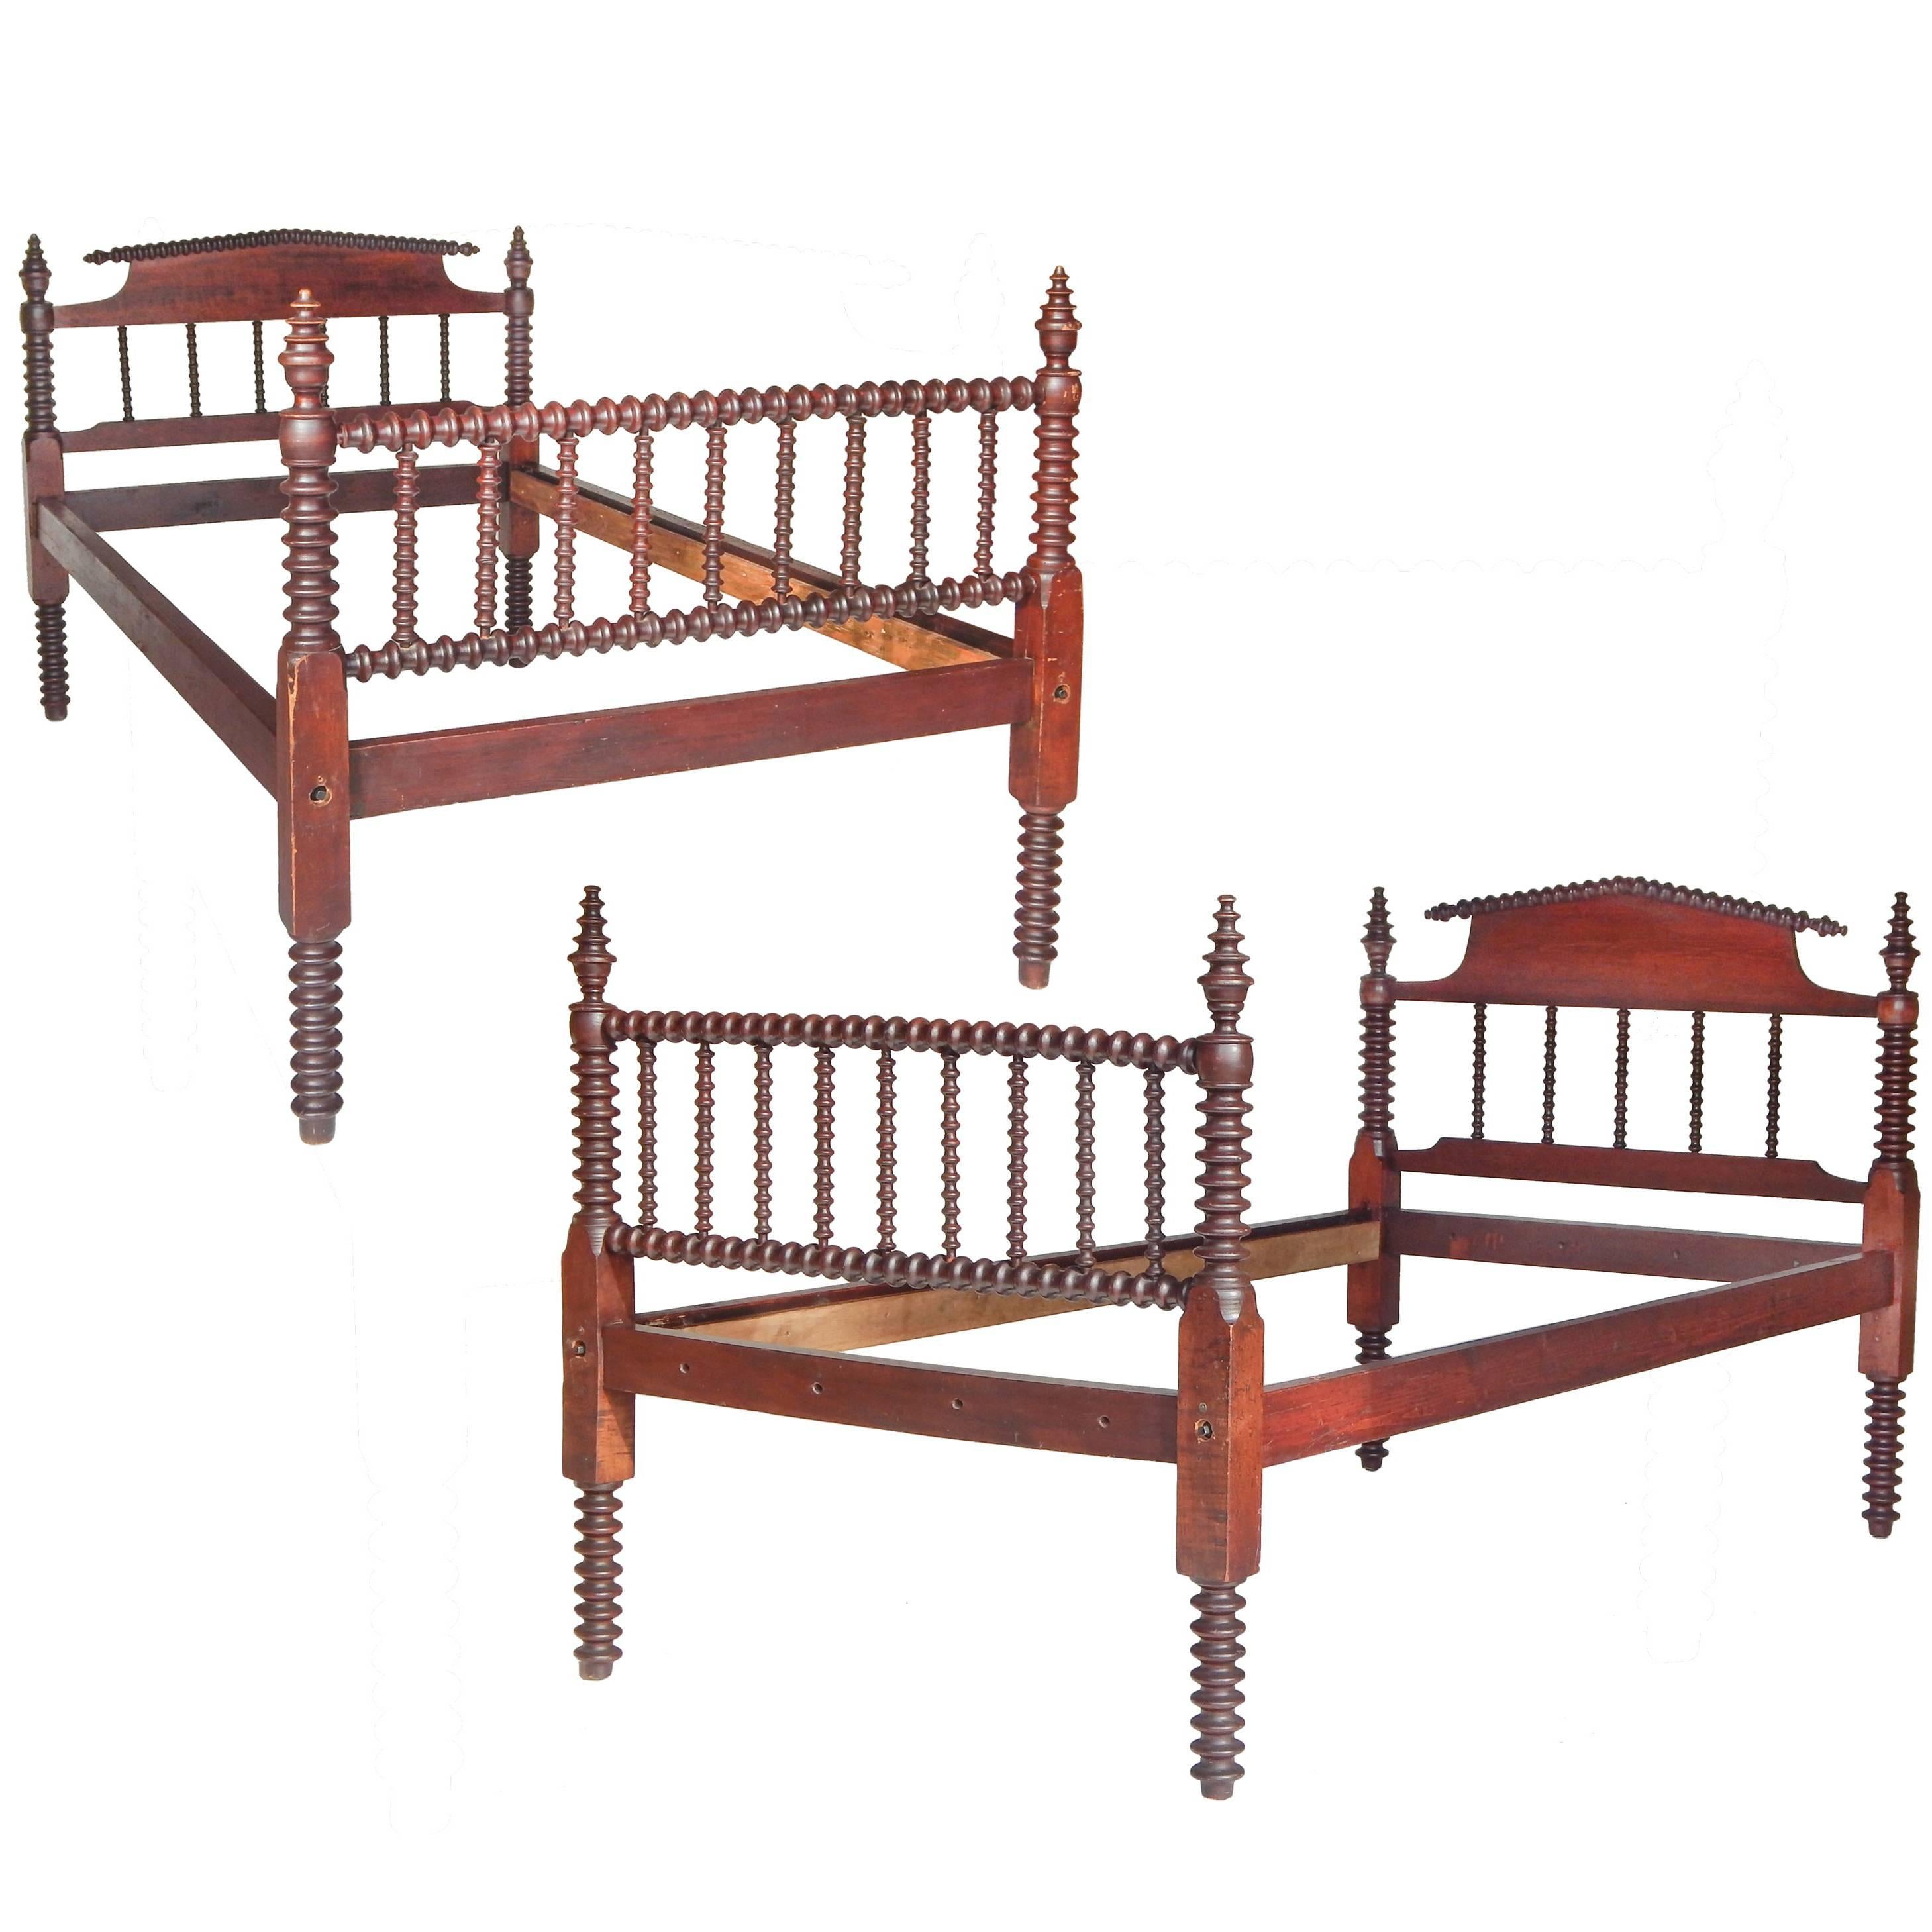 Stunning Spindle Beds For Sale